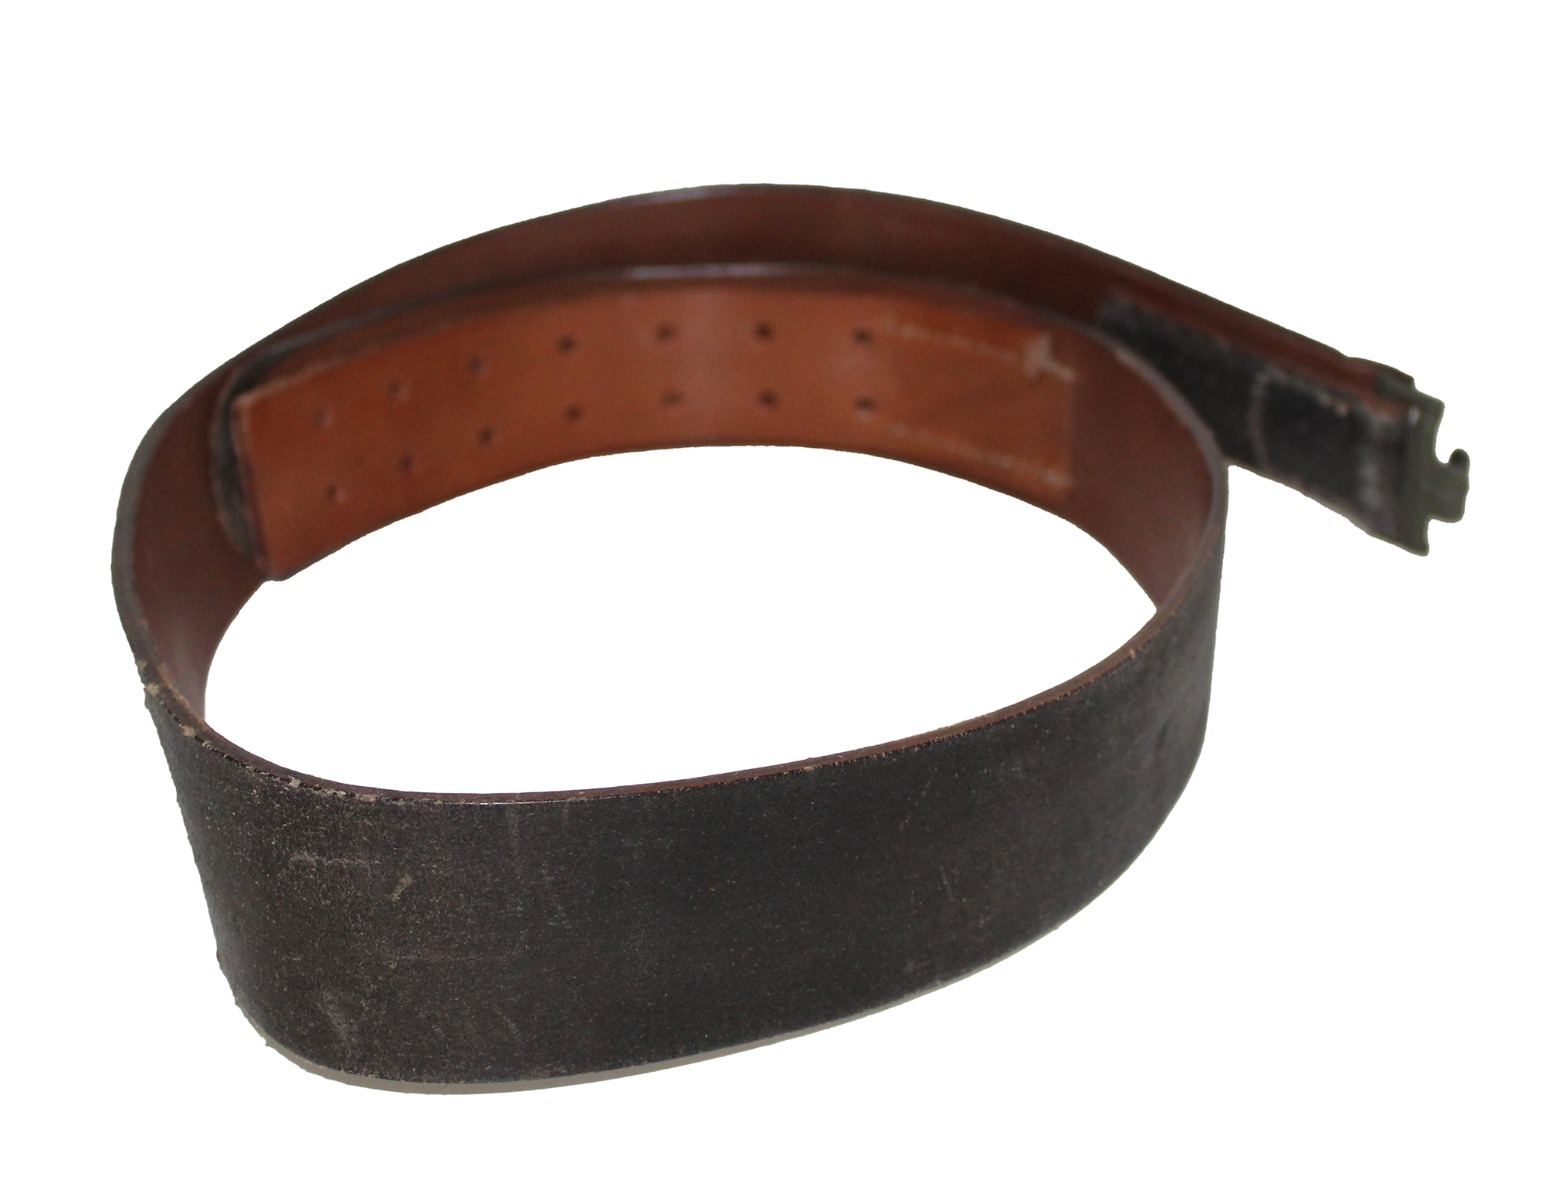 WAFFEN SS CONTRACT ENLISTED LEATHER BELT WITH RZM MARK 401/43 SS